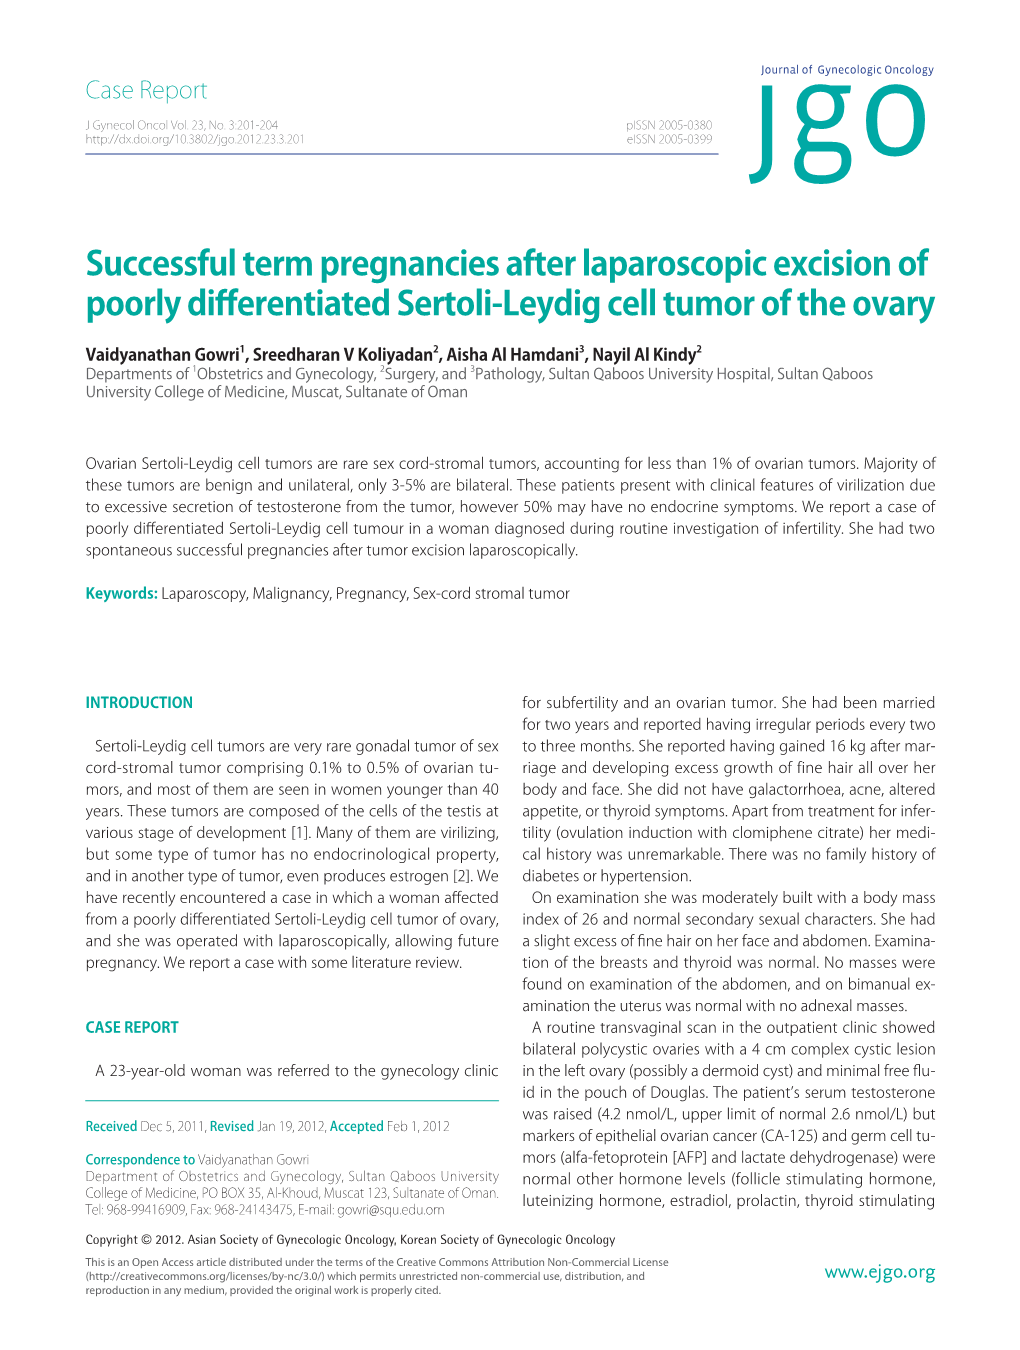 Successful Term Pregnancies After Laparoscopic Excision of Poorly Differentiated Sertoli-Leydig Cell Tumor of the Ovary